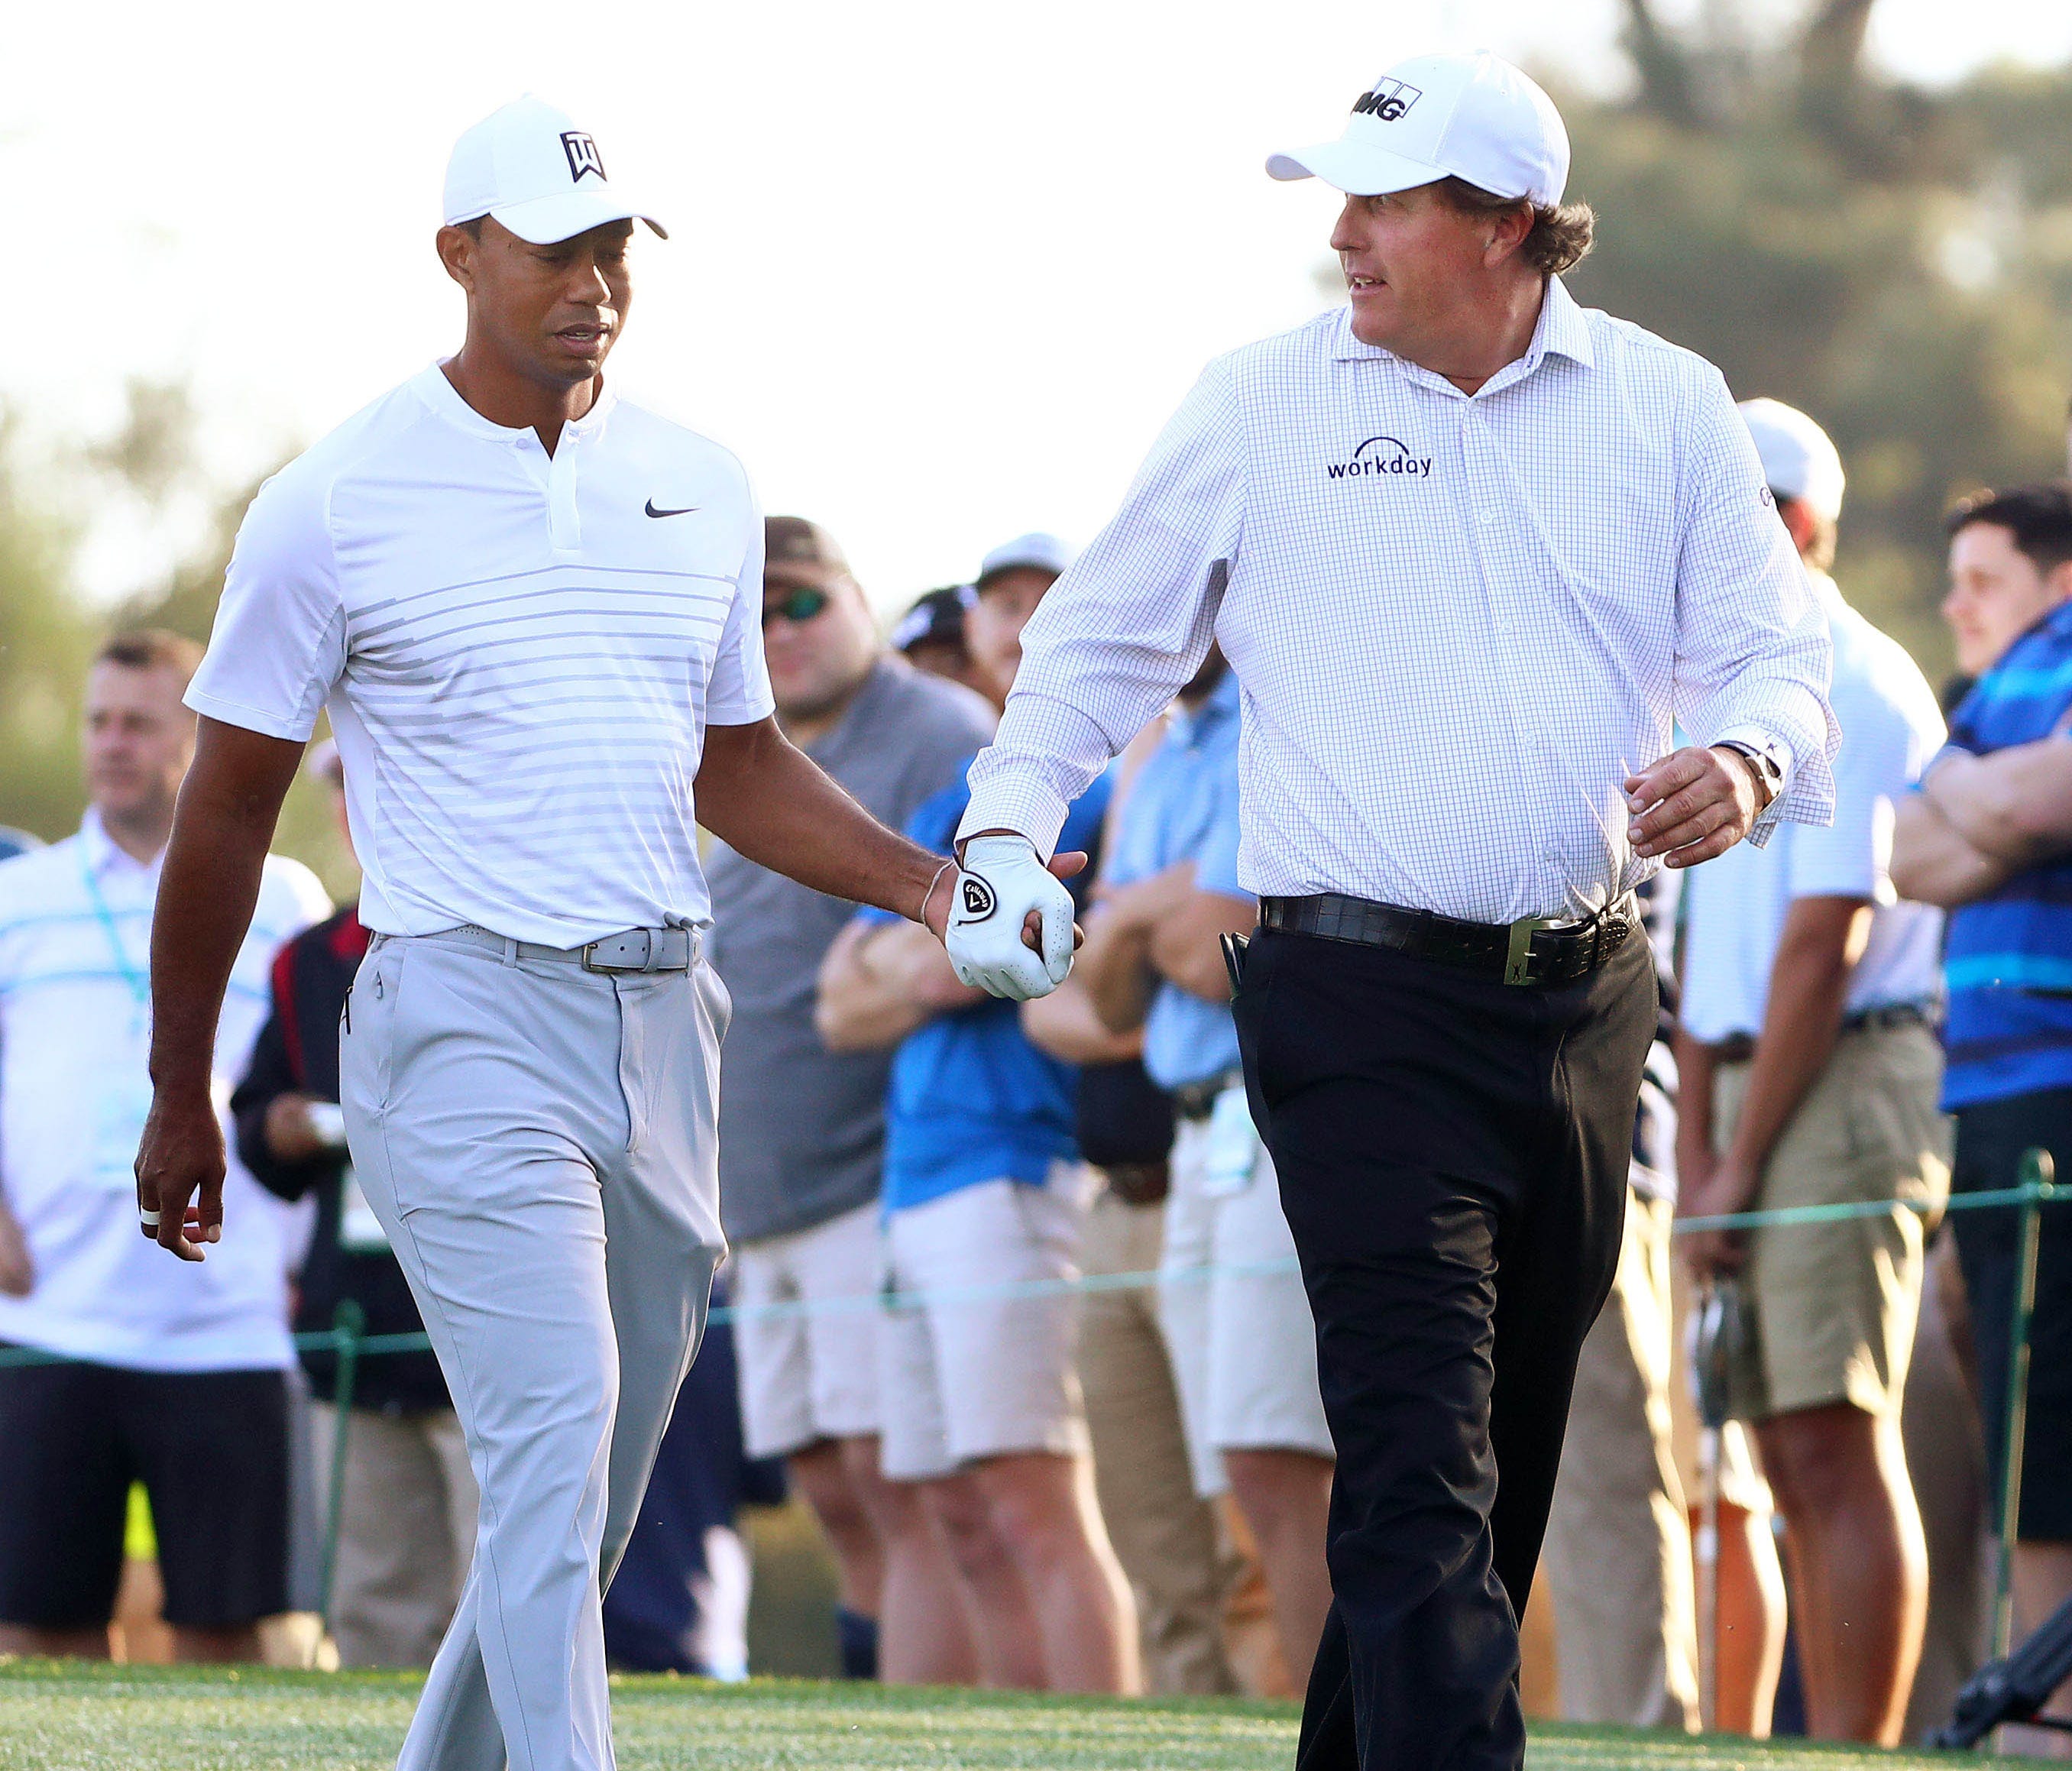 Tiger Woods and Phil Mickelson walk off the 10th tee box hand-in-hand during their practice round on the back nine at Augusta National in preparation for The Masters.